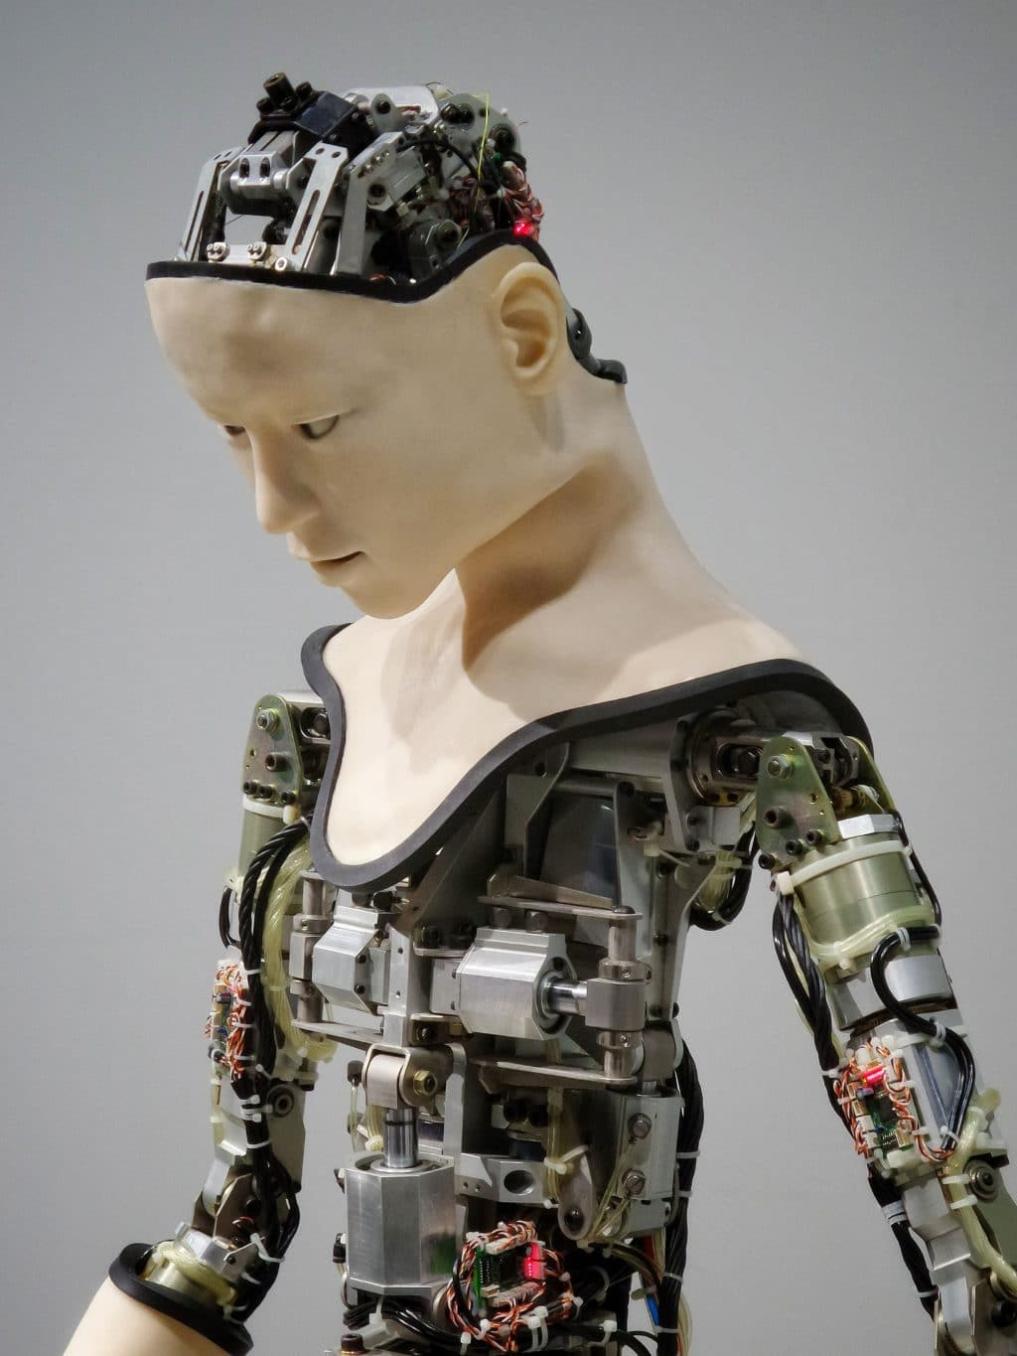 What Are The Educational And Skill Requirements For Working In The Field Of AI And Robotics?